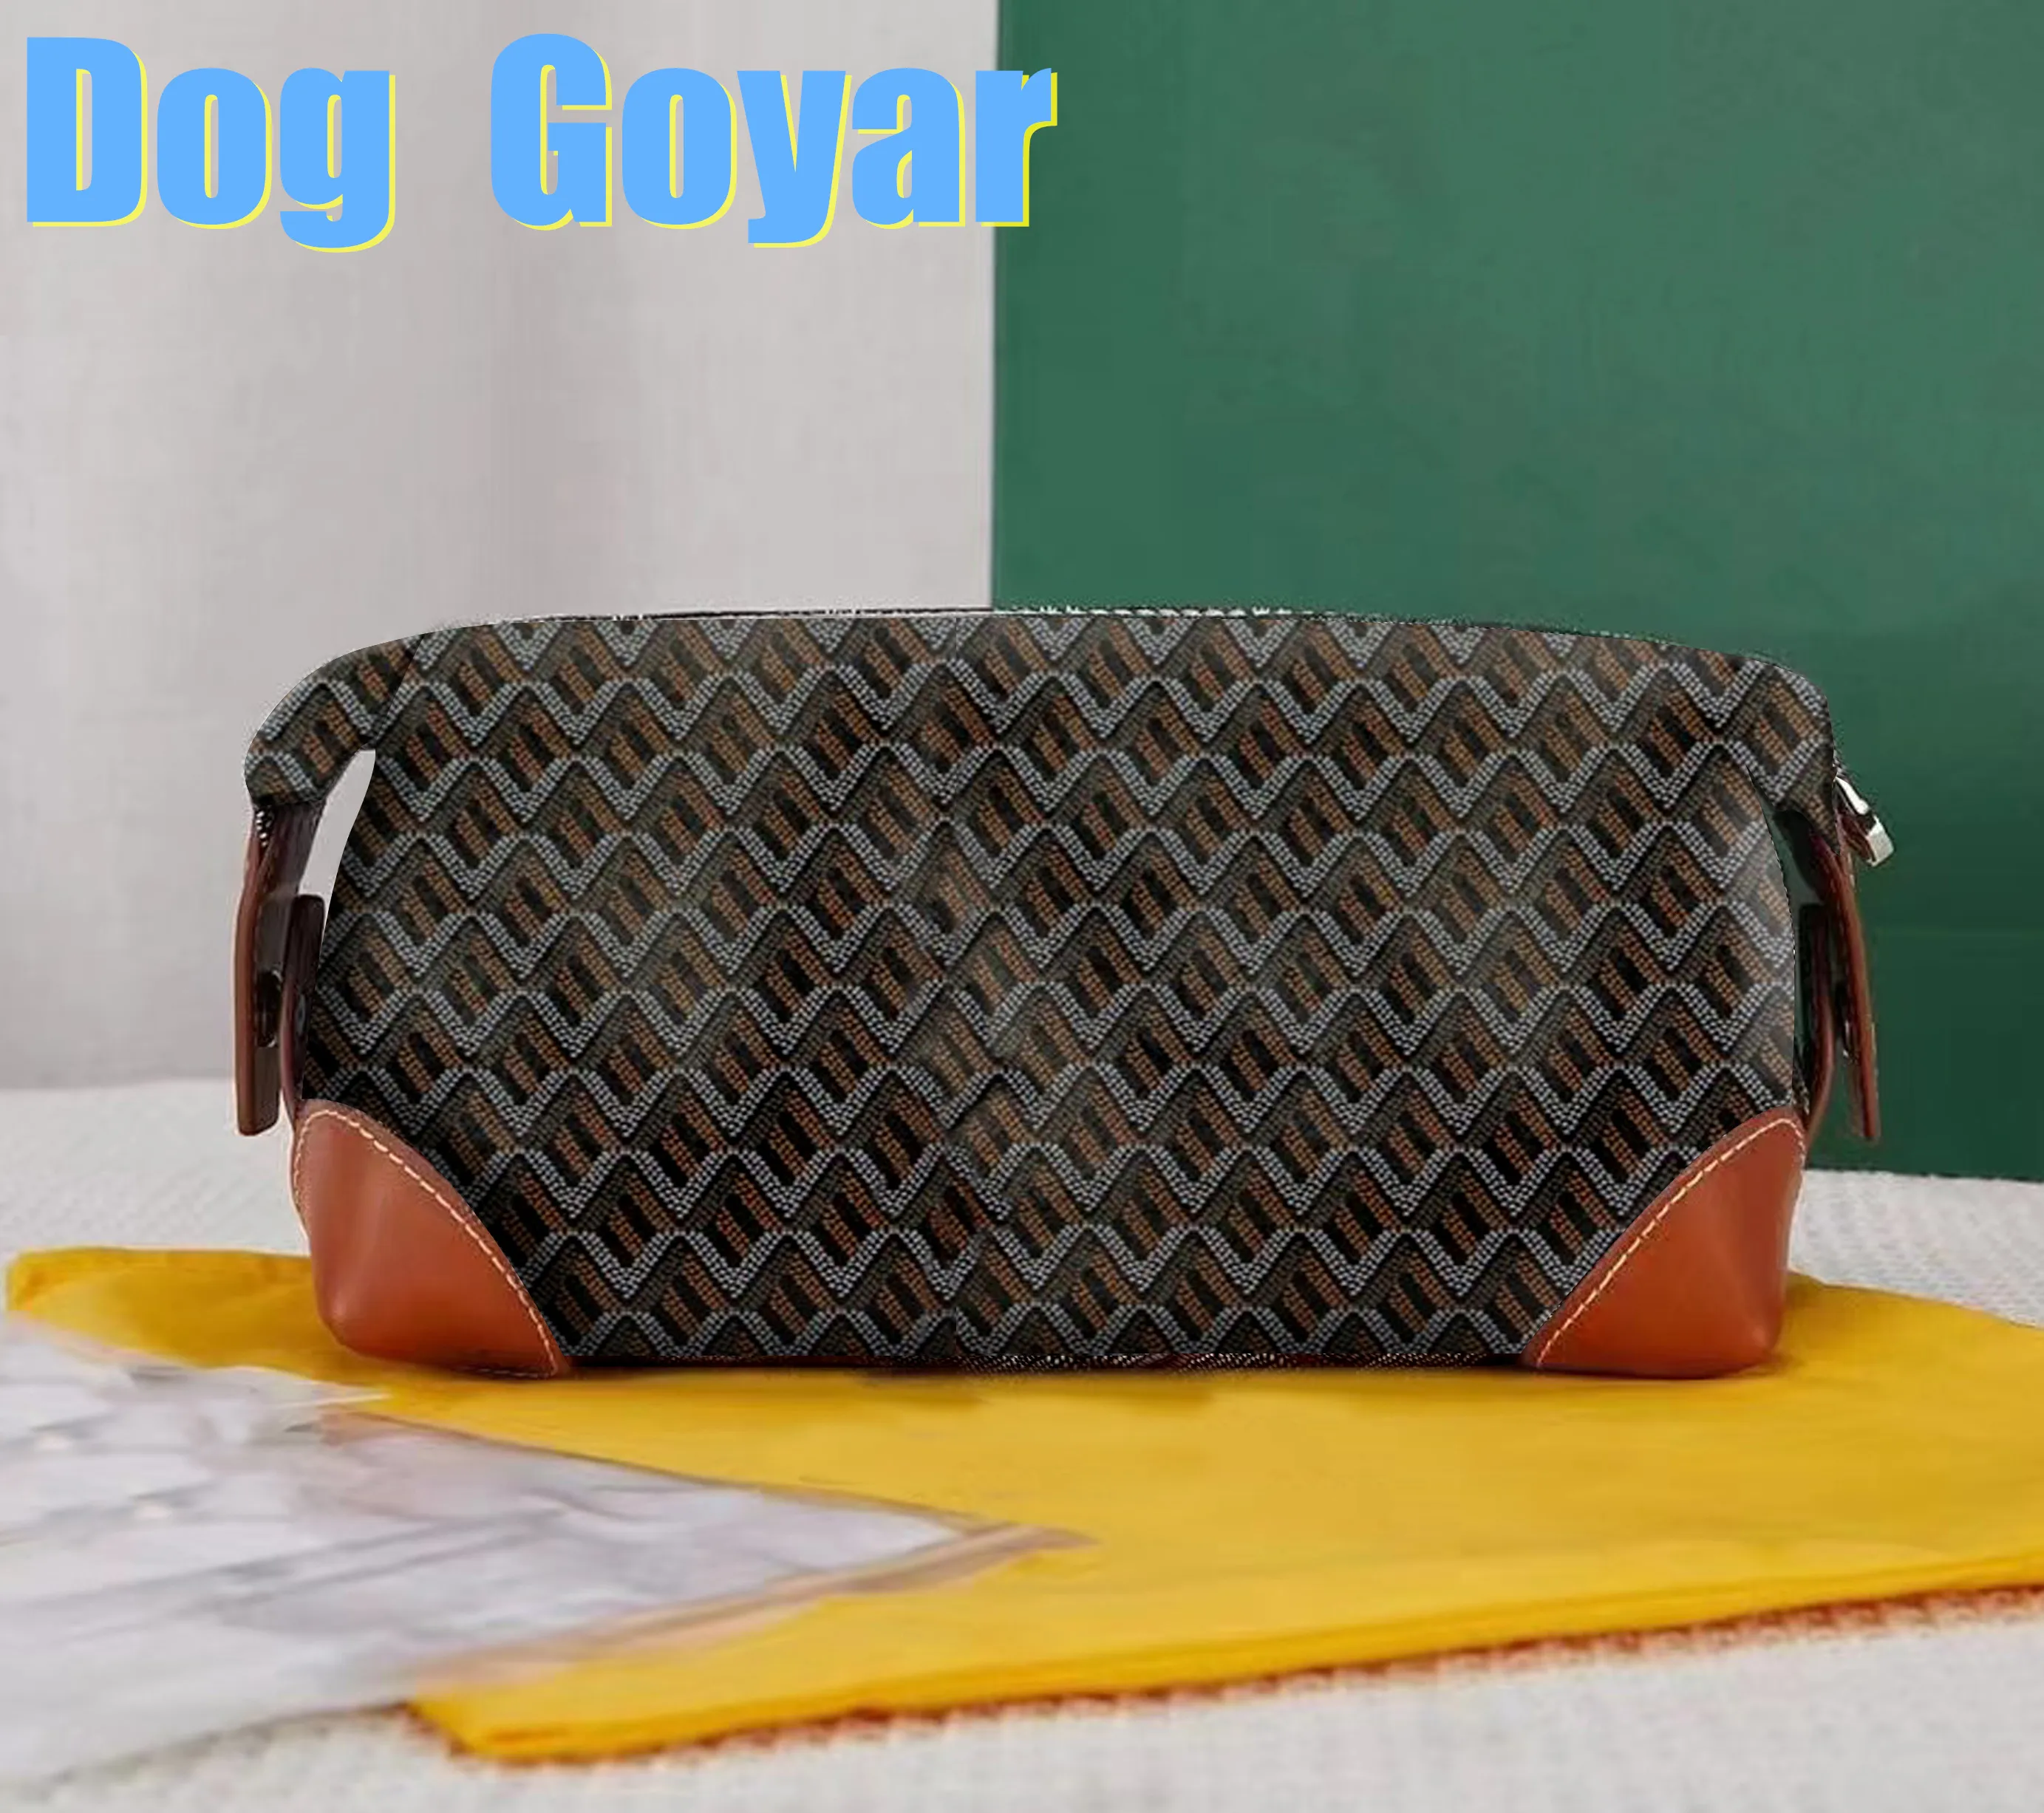 

Dog Goyar Clutch Bags Women men A+++++ hig quality Envelope package documents Toiletry Pouch Protection Makeup Clutch Leather